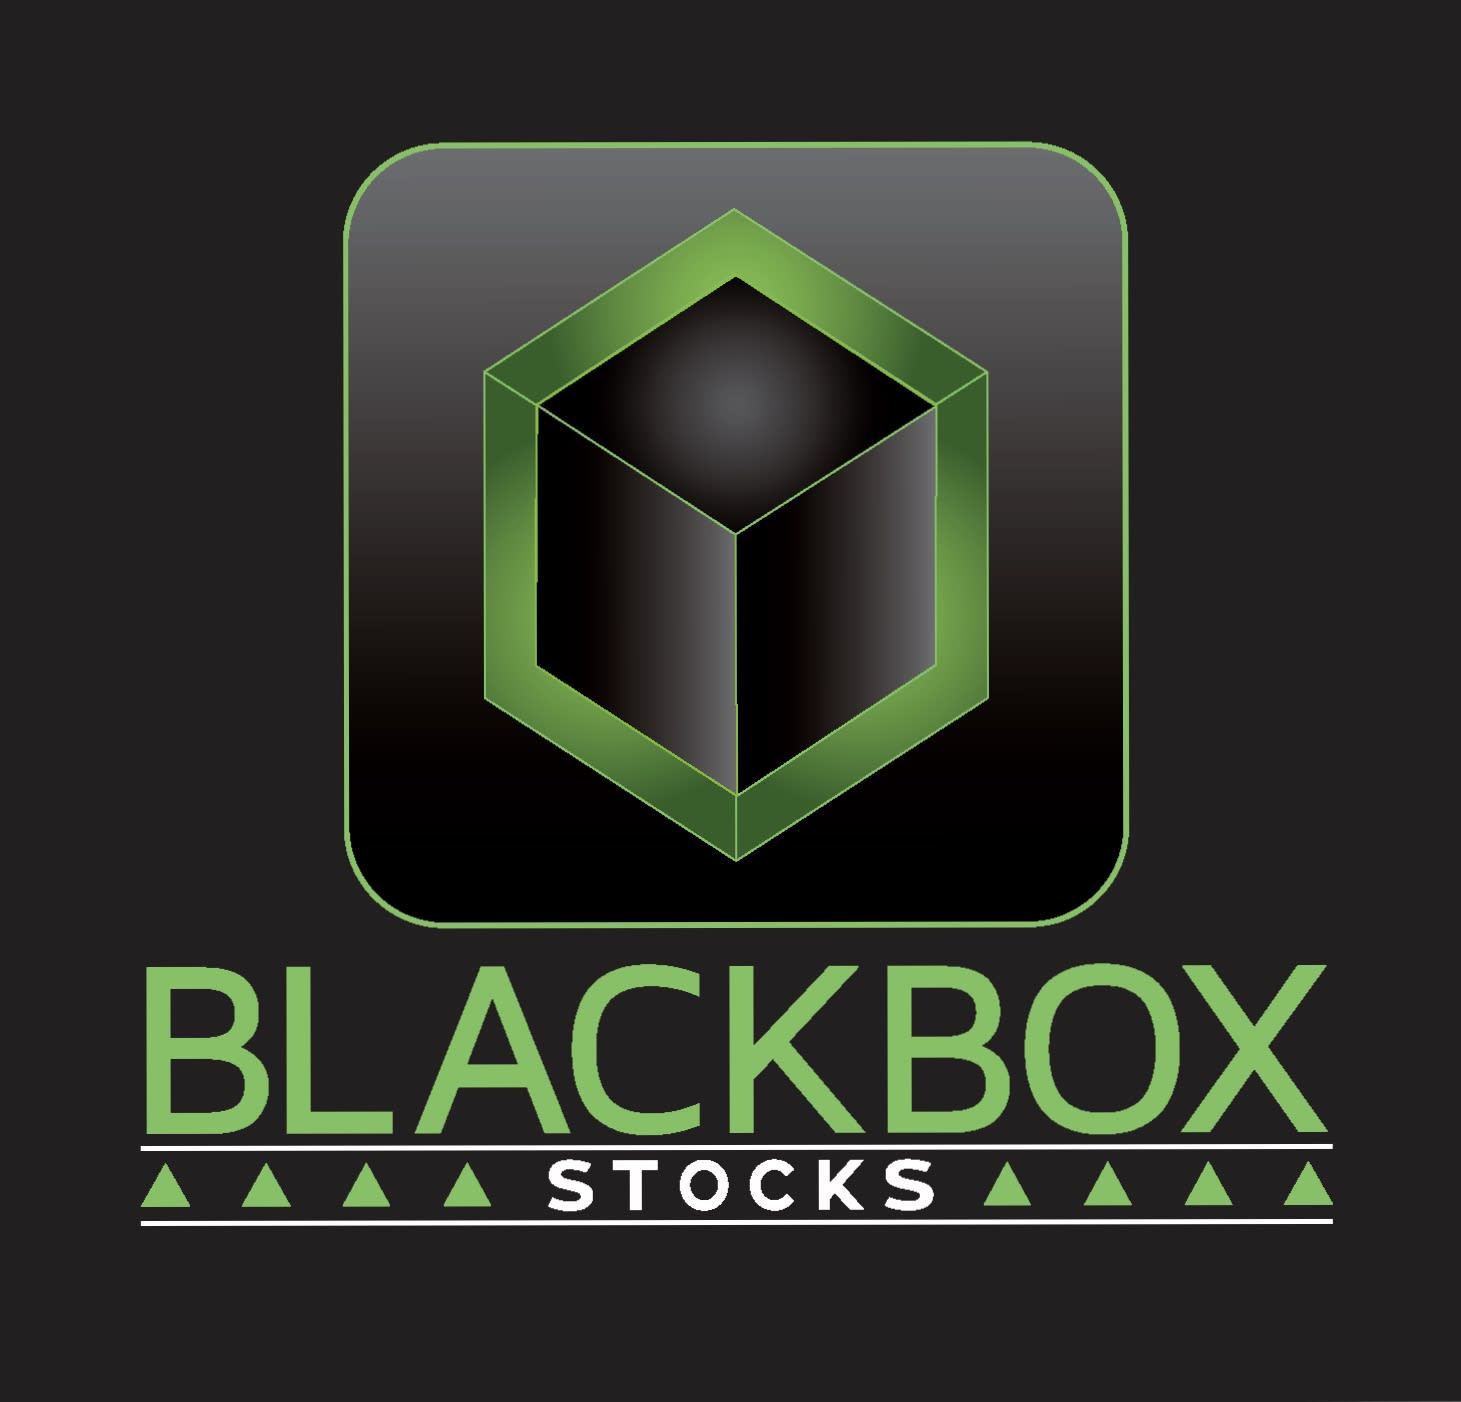 Blackboxstocks, Inc. Adds 18% To Its April Gains; Record-Setting Results And Bullish Guidance Continue To Fuel Appreciation ($BLBX)